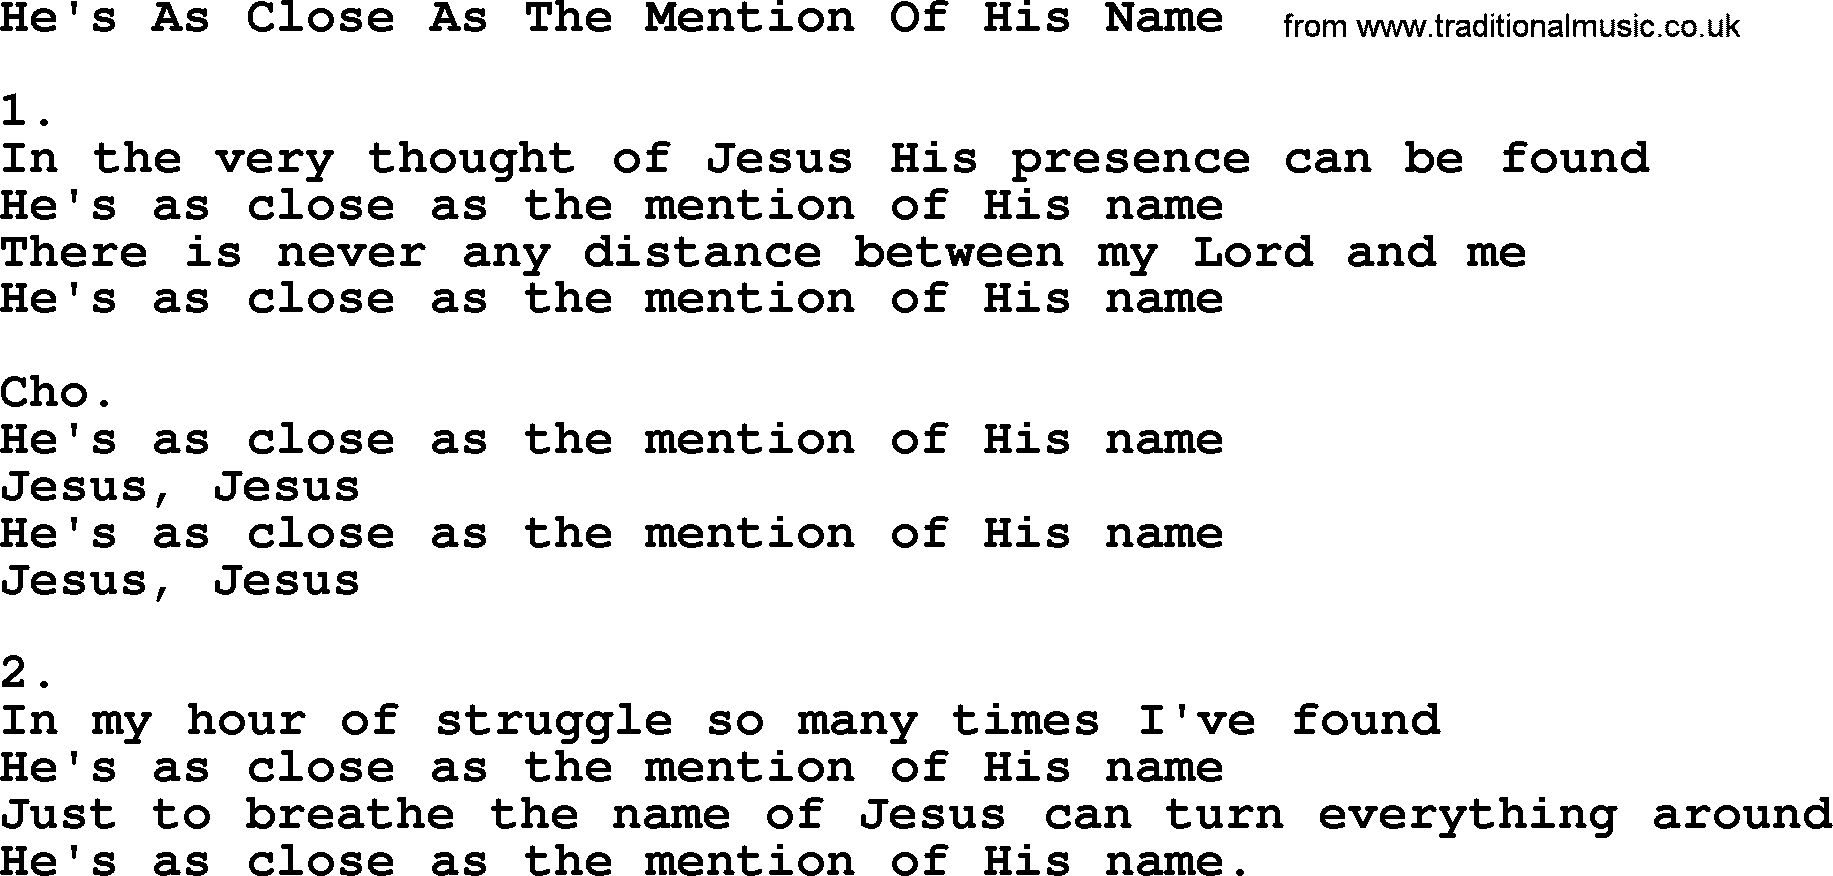 Apostolic & Pentecostal Hymns and Songs, Hymn: He's As Close As The Mention Of His Name lyrics and PDF